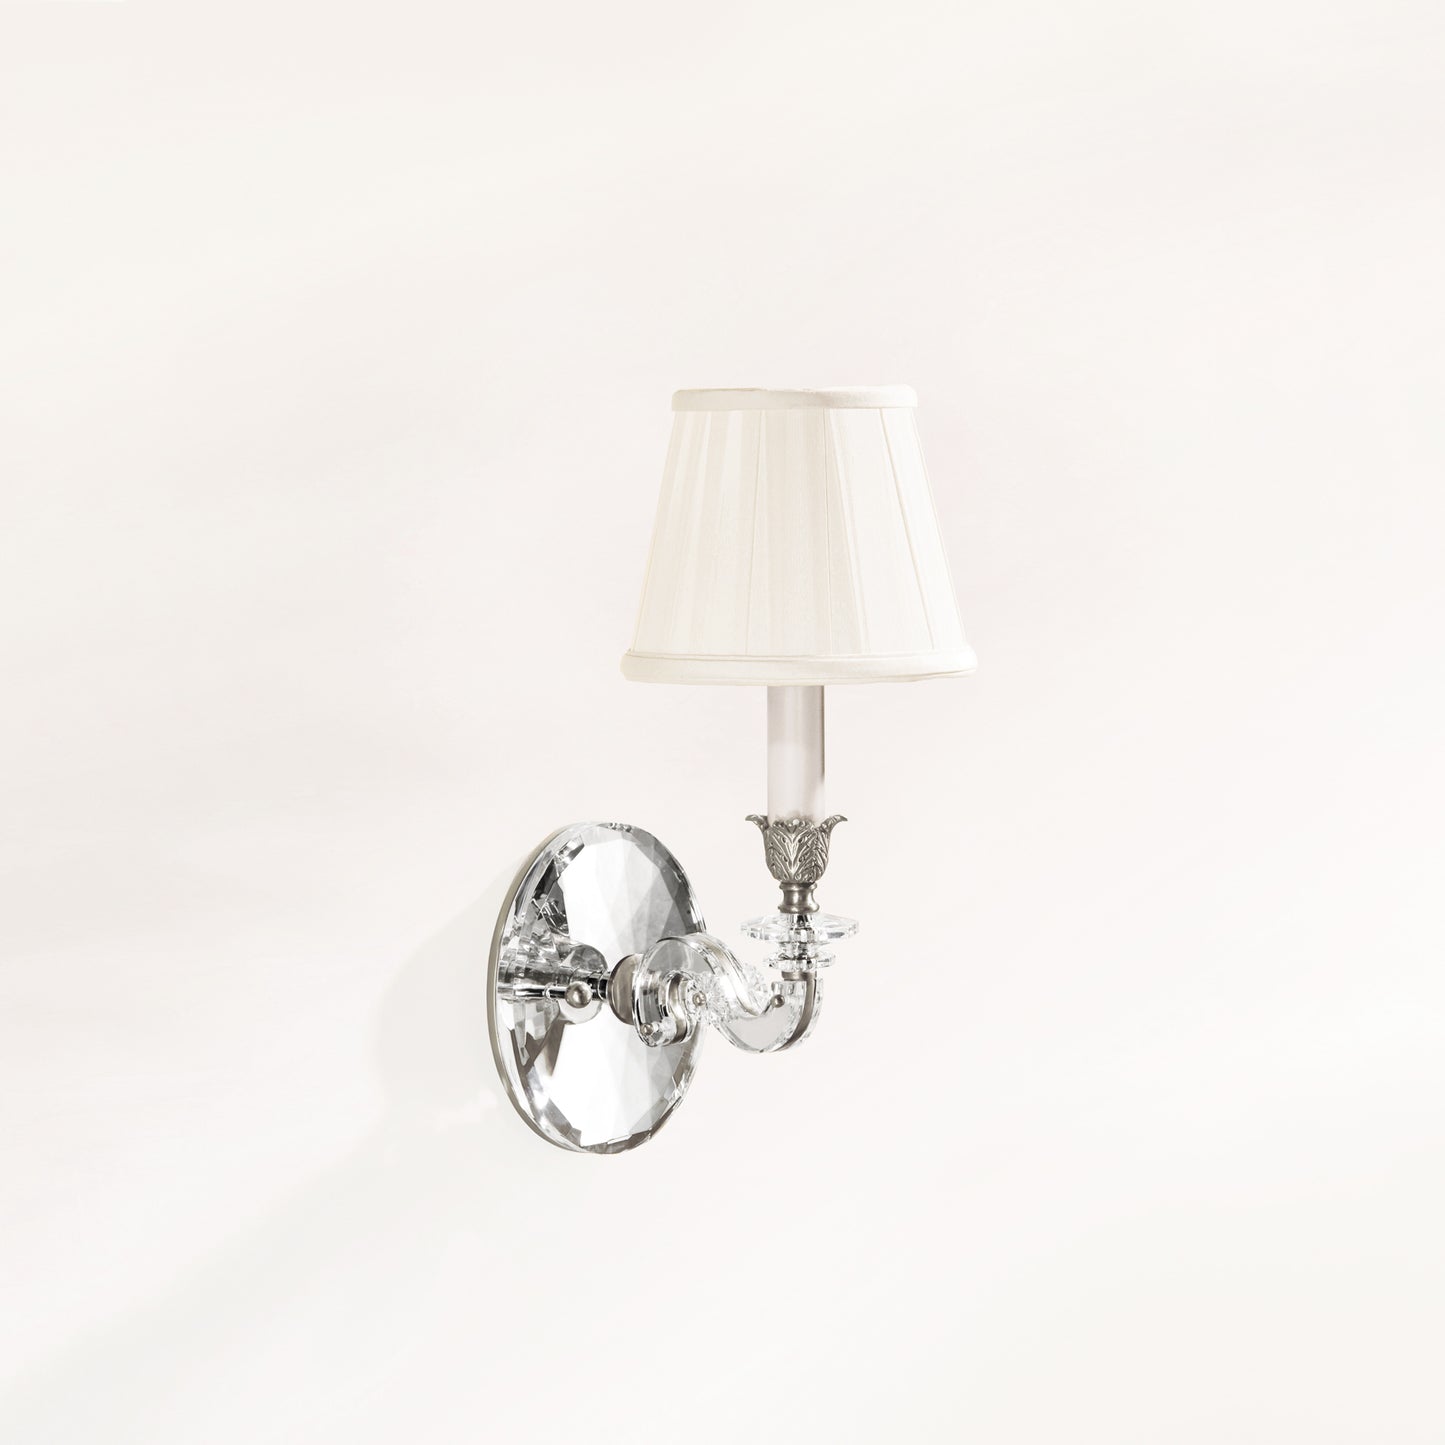 Crystal and polished nickel wall sconce with traditional pleated shade.